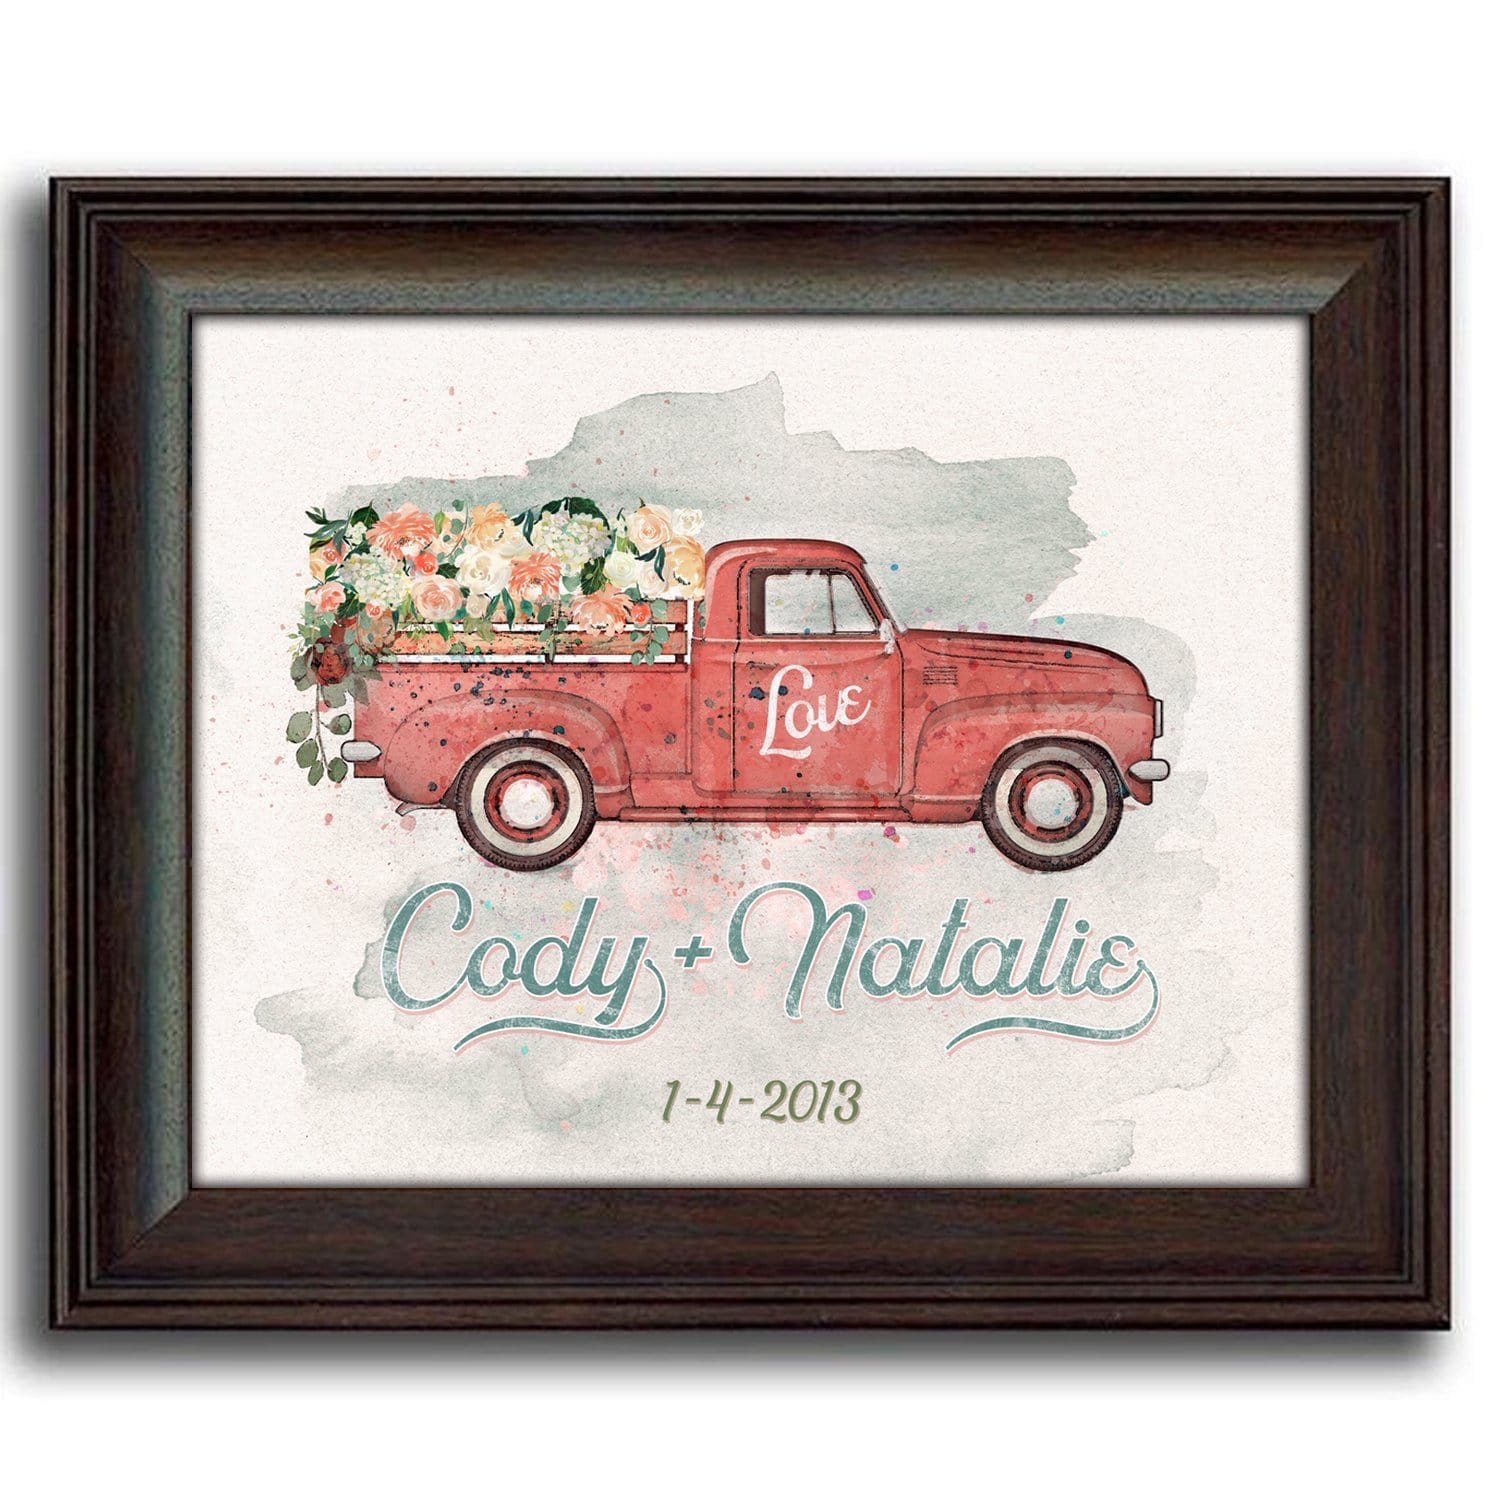 Romantic personalized gift of nostalgic watercolor art featuring a red truck and your customization